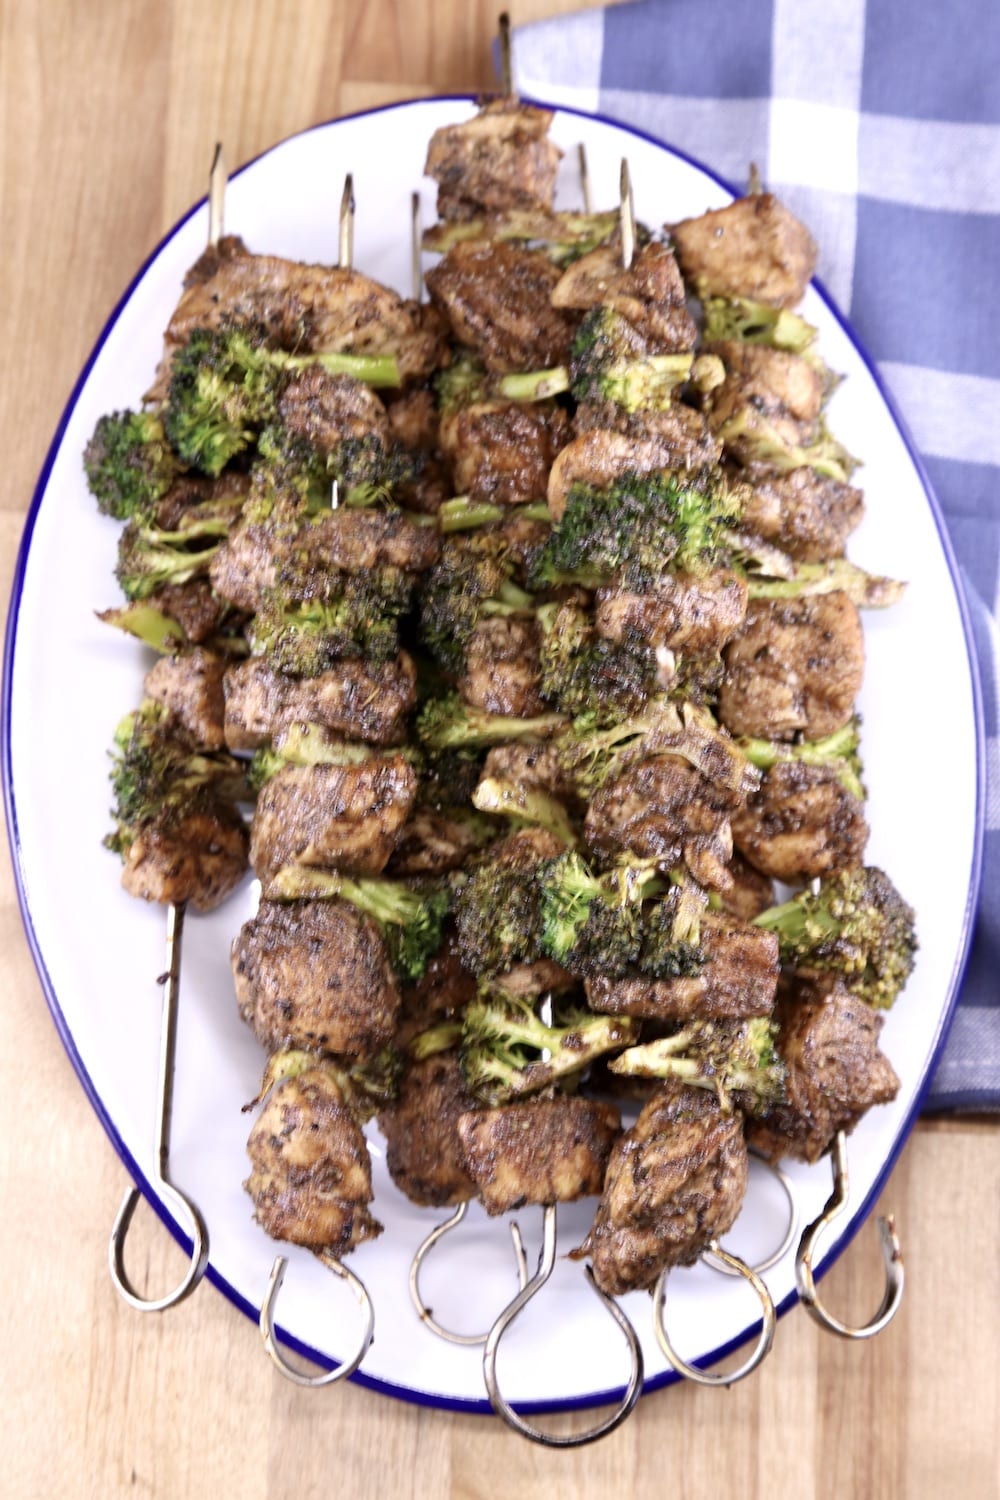 Platter of chicken and broccoli kabobs on an oval platter